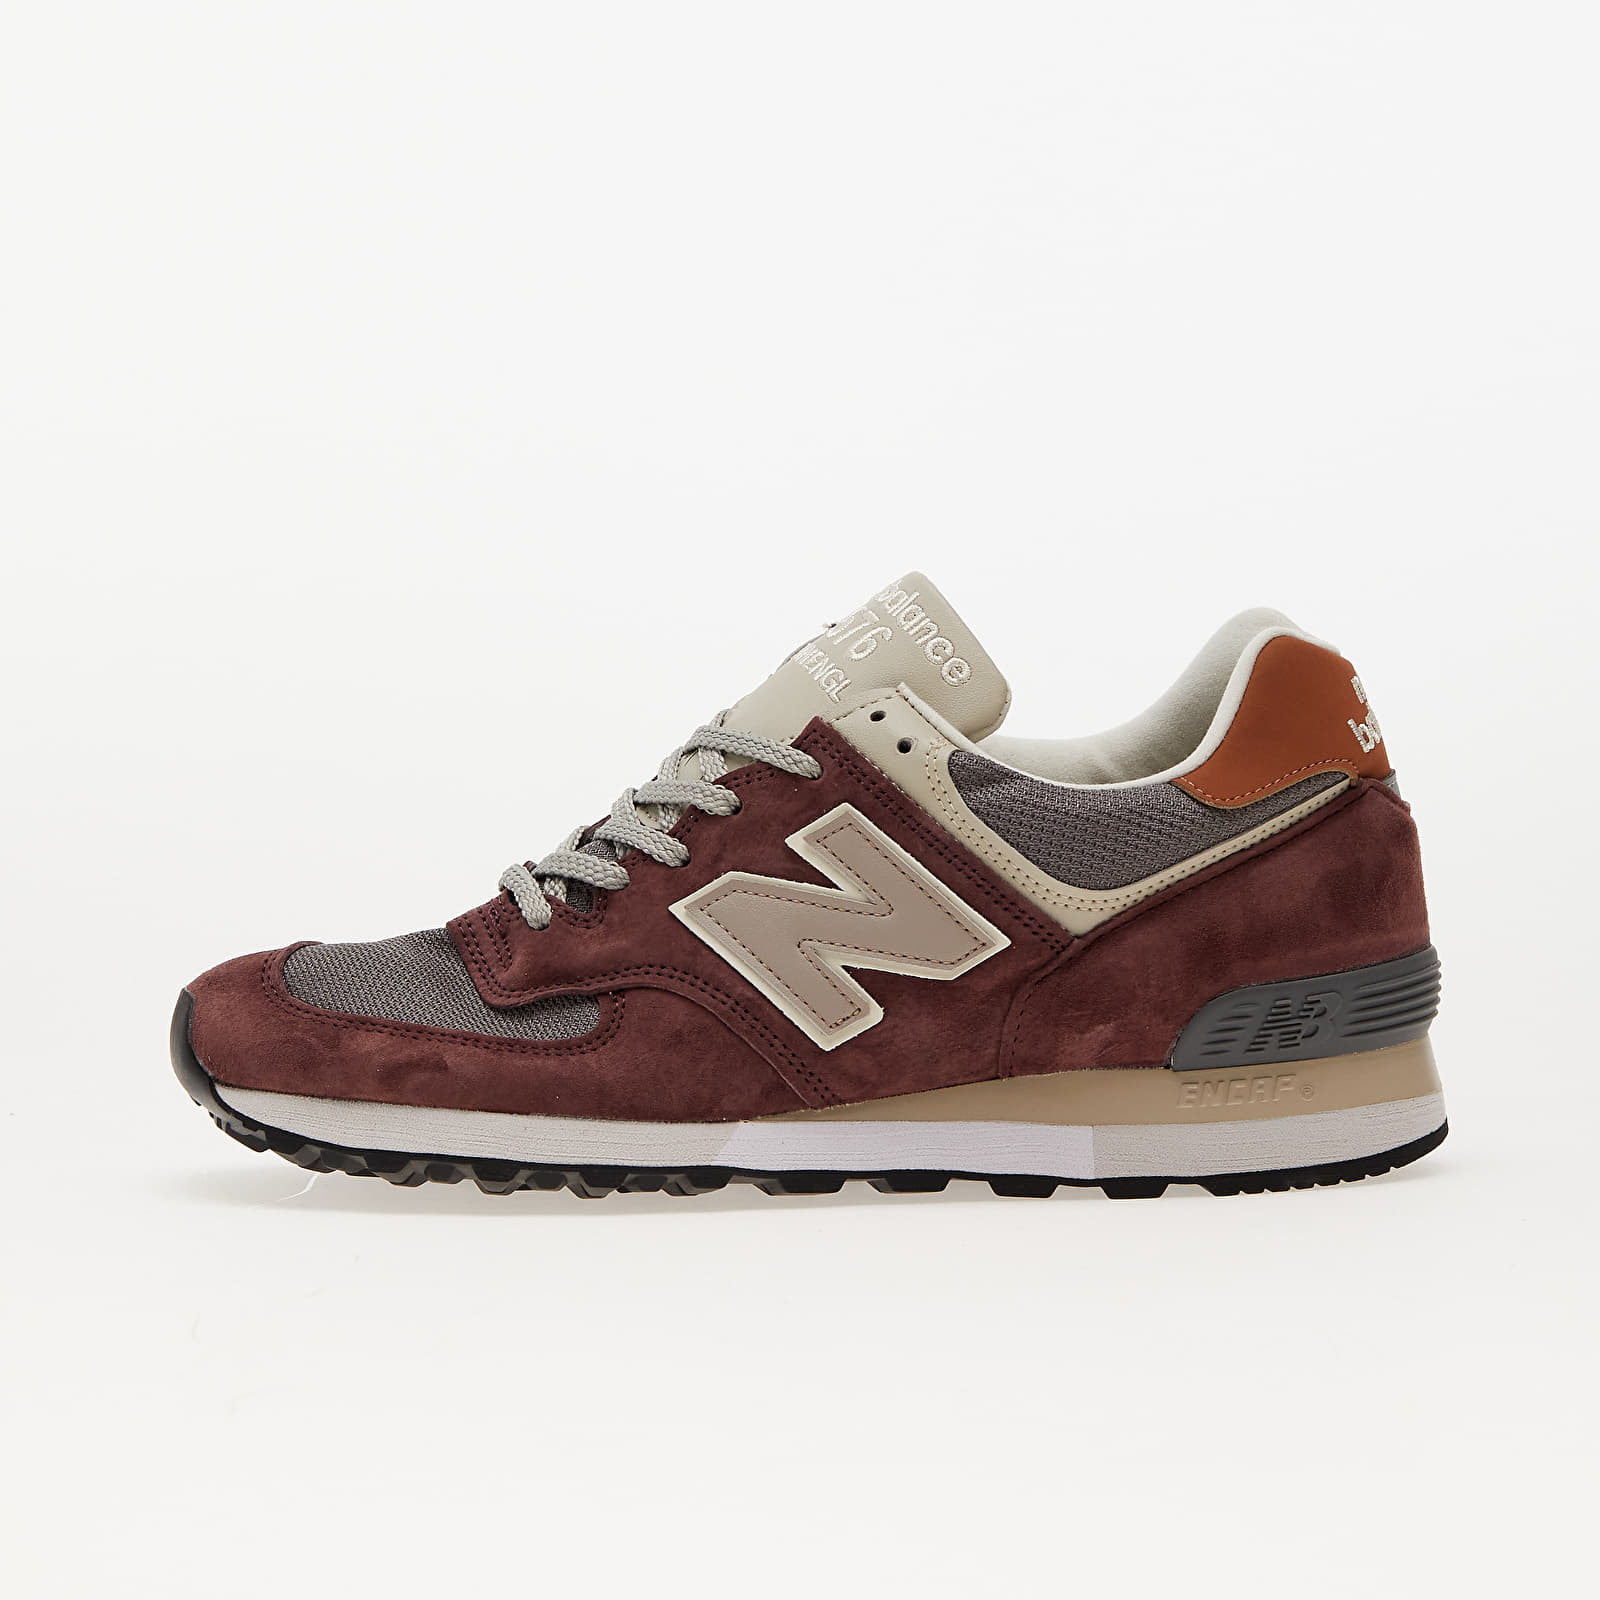 Men's shoes New Balance 576 Made in UK Underglazed Brown